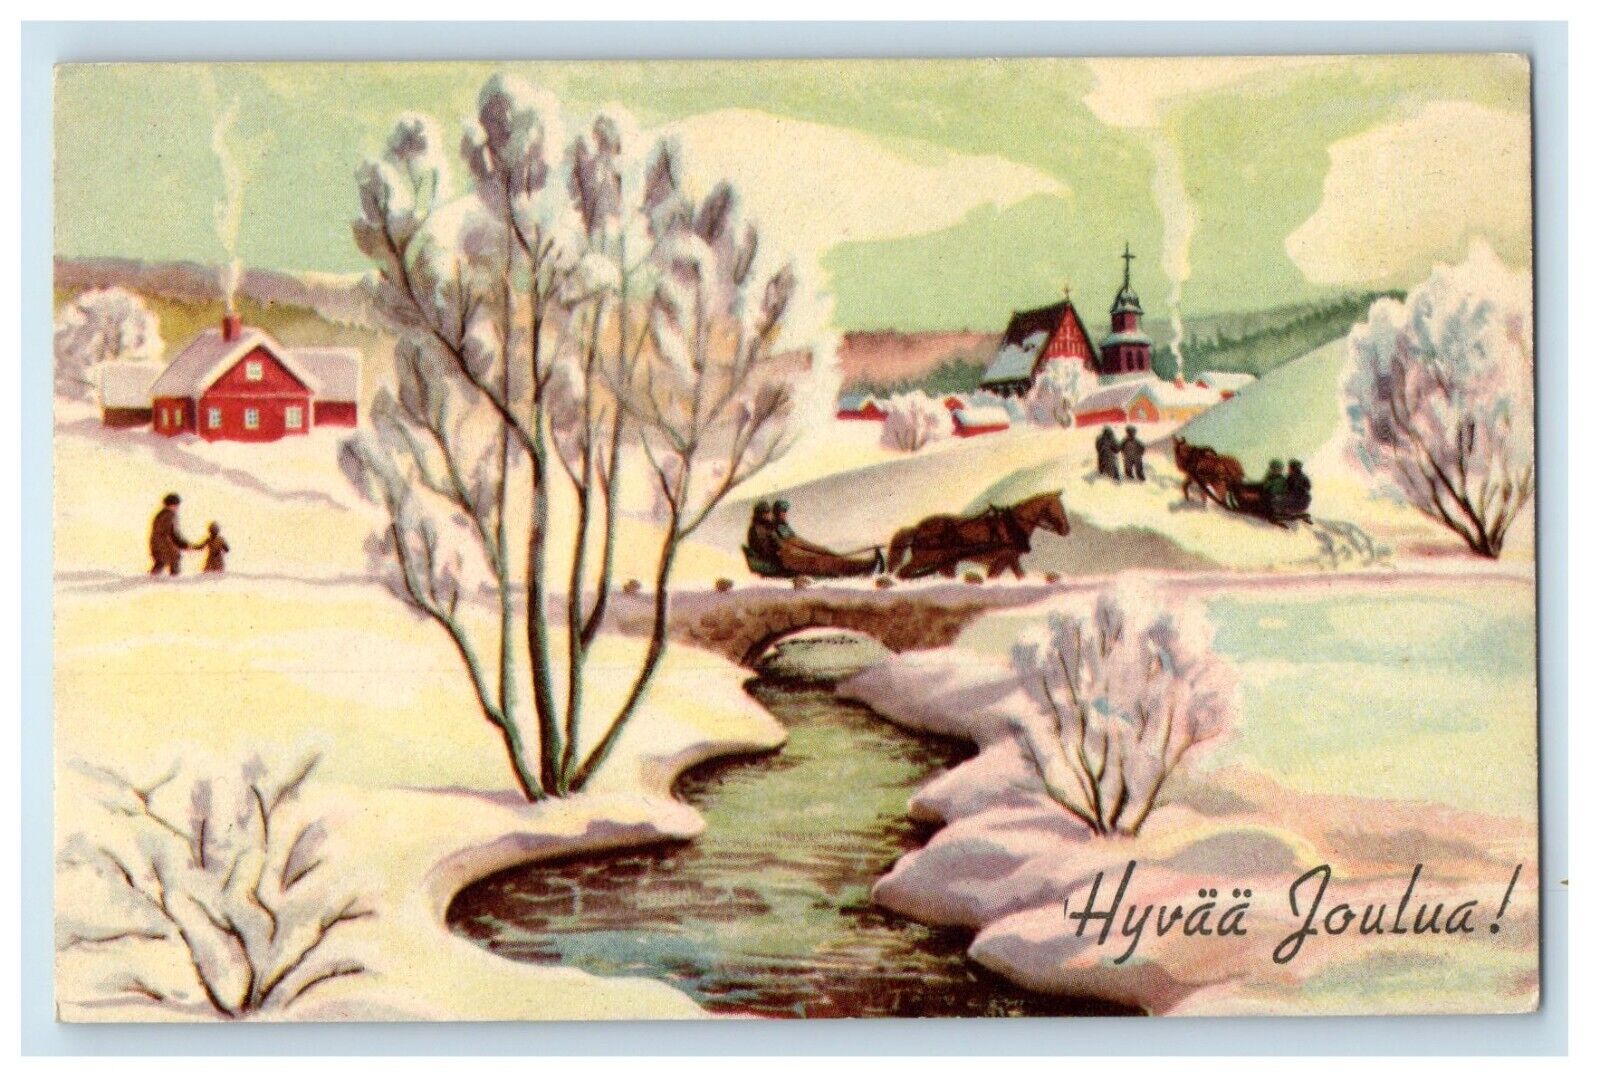 1948 Merry Christmas Hyvaa Joulua Horse Sled Winter Snow Finland Posted Postcard